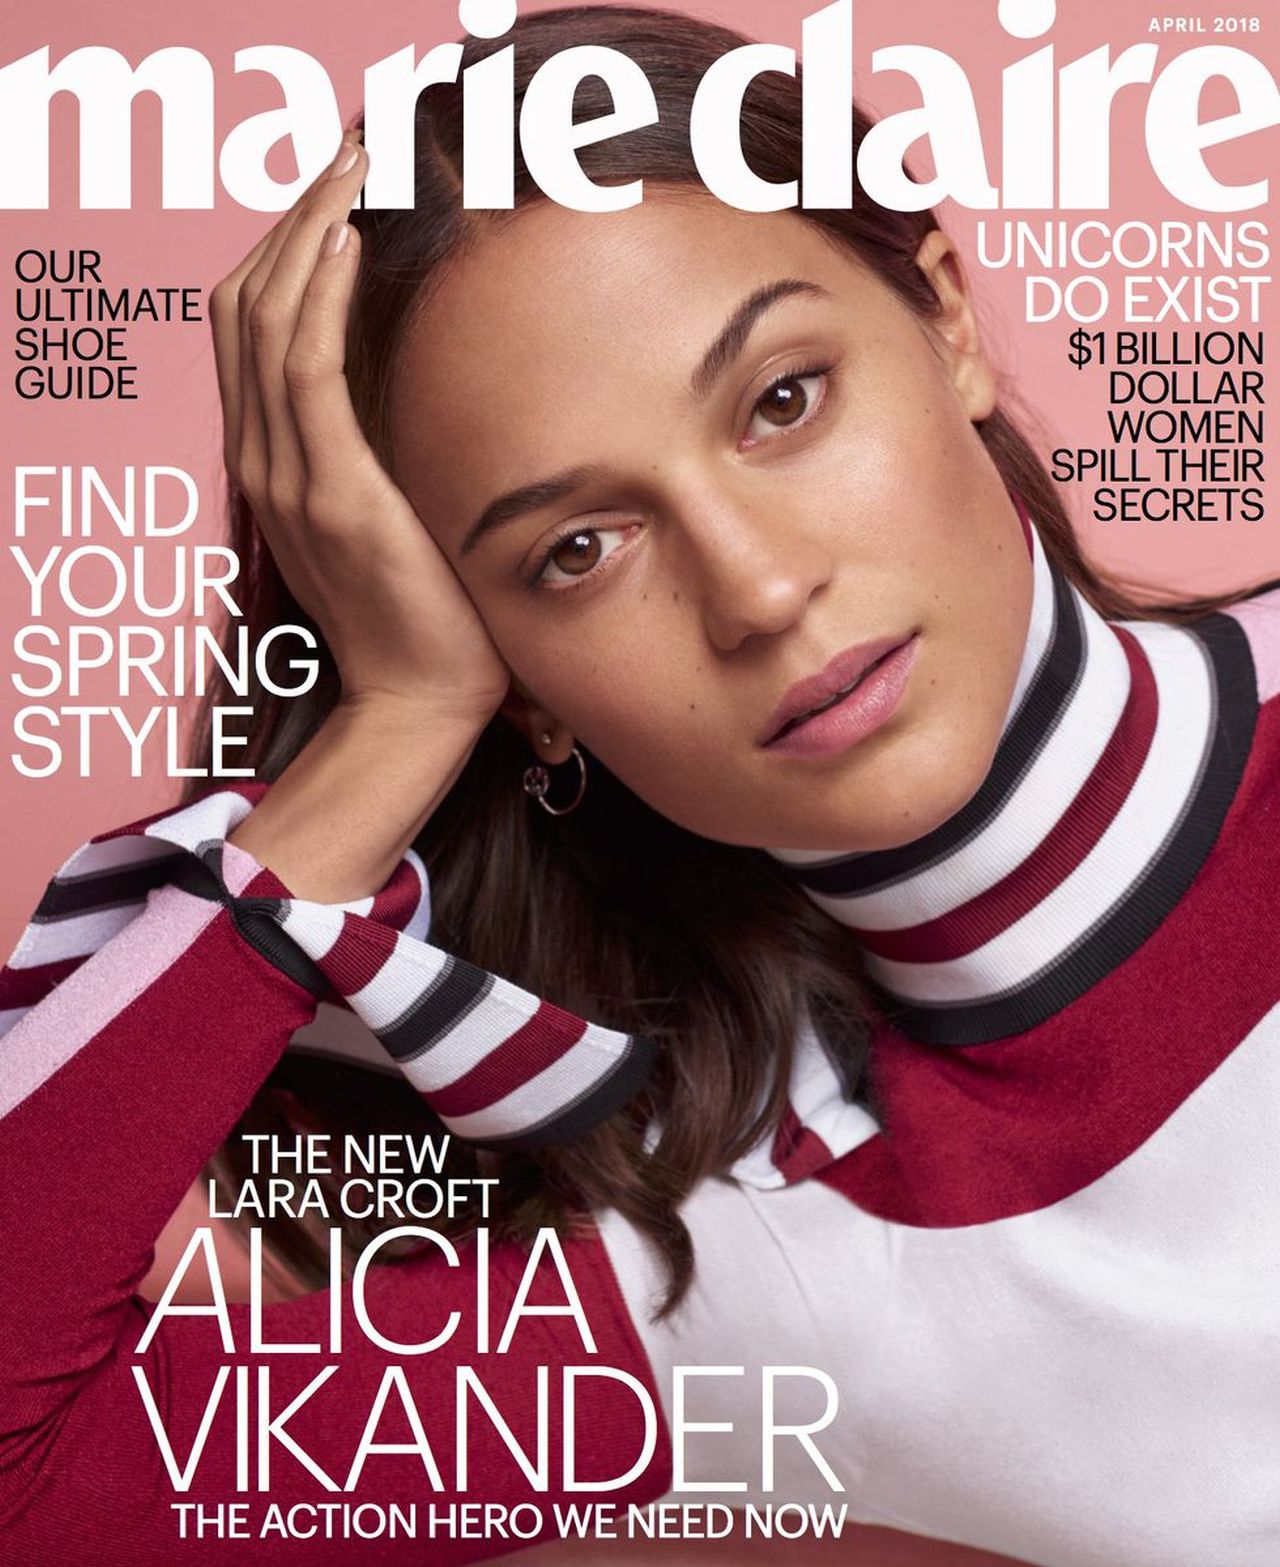 Hot property: Sweden's Alicia Vikander is film's new it girl